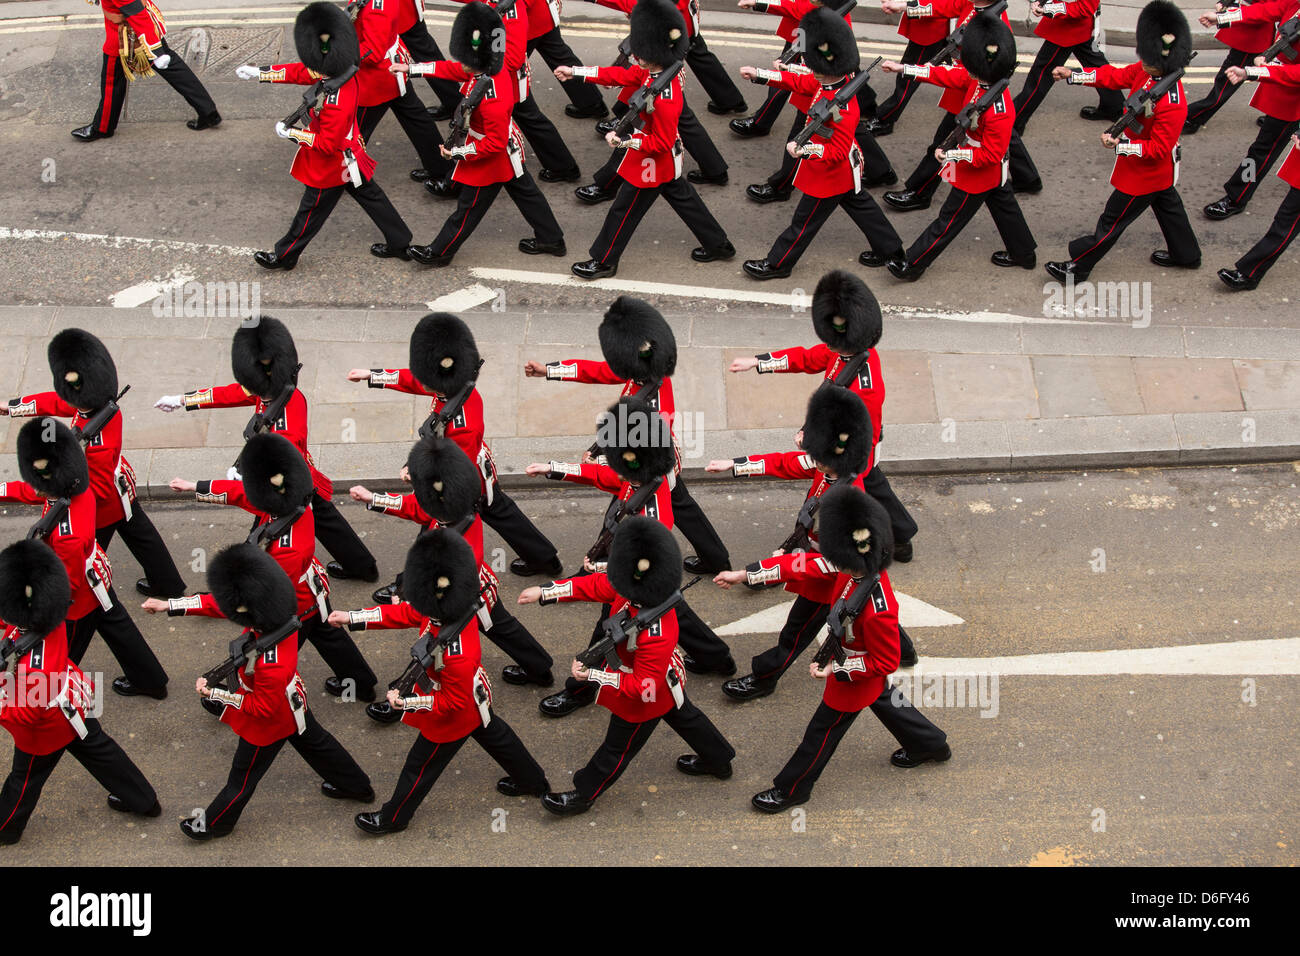 London, UK, 17 April 2013. Soldiers march at funeral procession of Baroness Thatcher. Credit: Sarah Peters/Alamy Live News Stock Photo